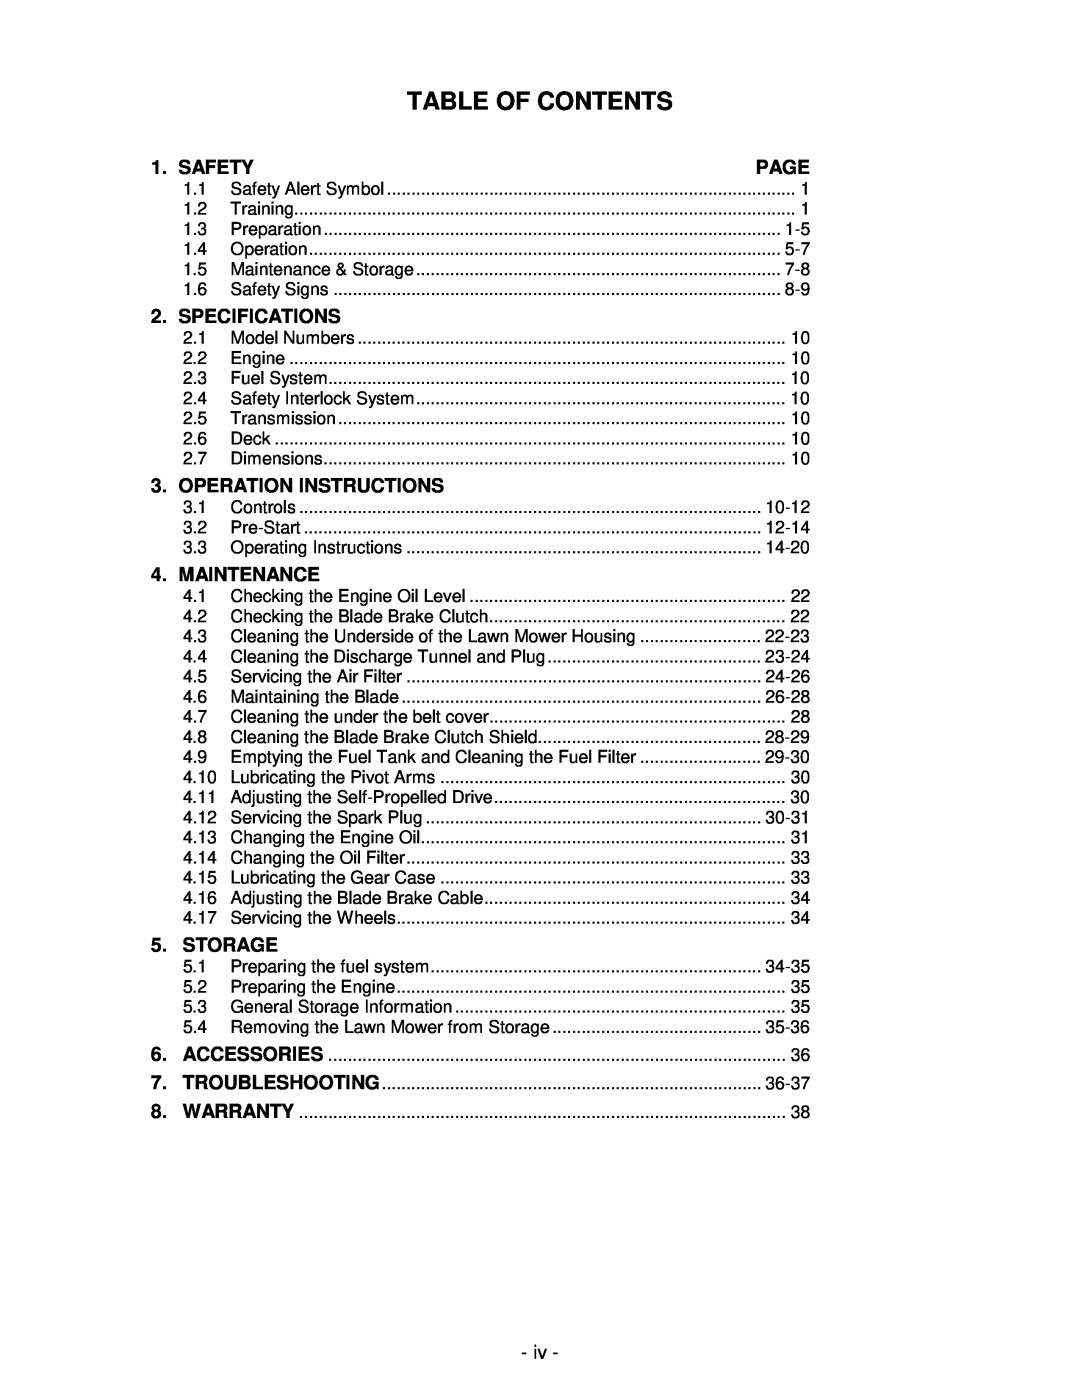 Honda Power Equipment metro 21 manual Table Of Contents, Safety, Page, Specifications, Operation Instructions, Maintenance 